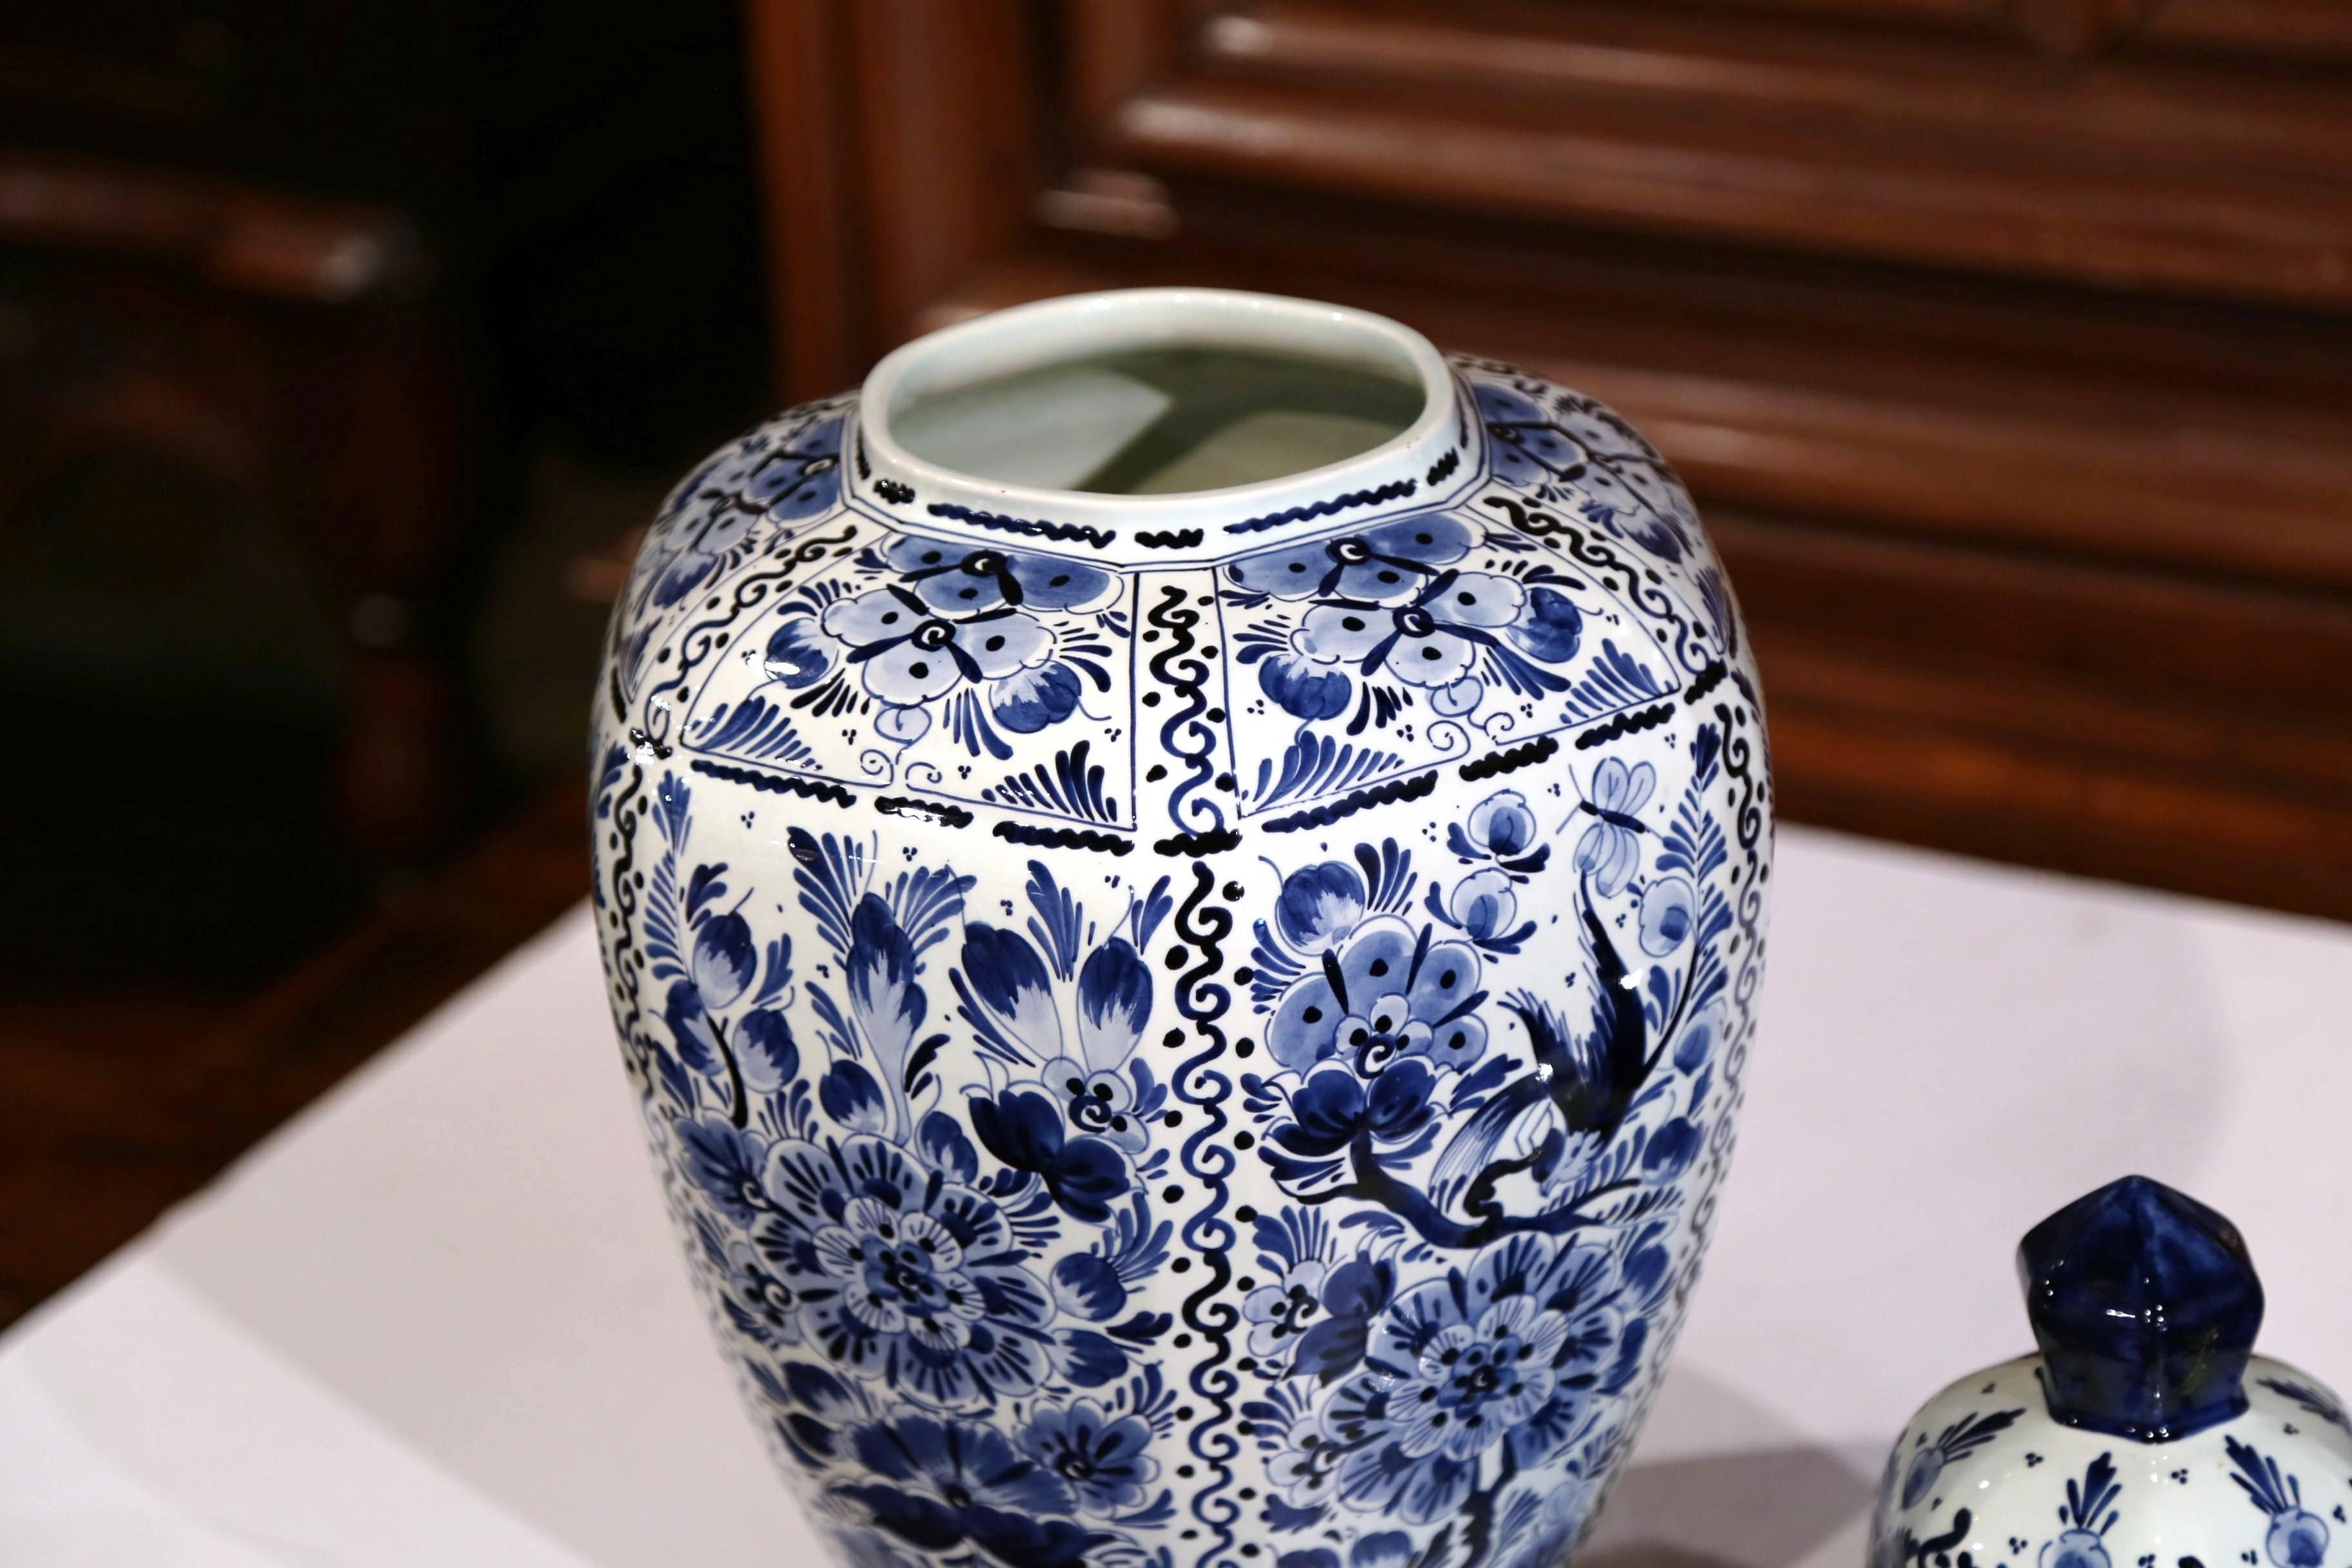 26 attractive Delft Blue Holland Vase 2024 free download delft blue holland vase of large mid 20th century dutch blue and white faience delft ginger jar pertaining to large mid 20th century dutch blue and white faience delft ginger jar with top at